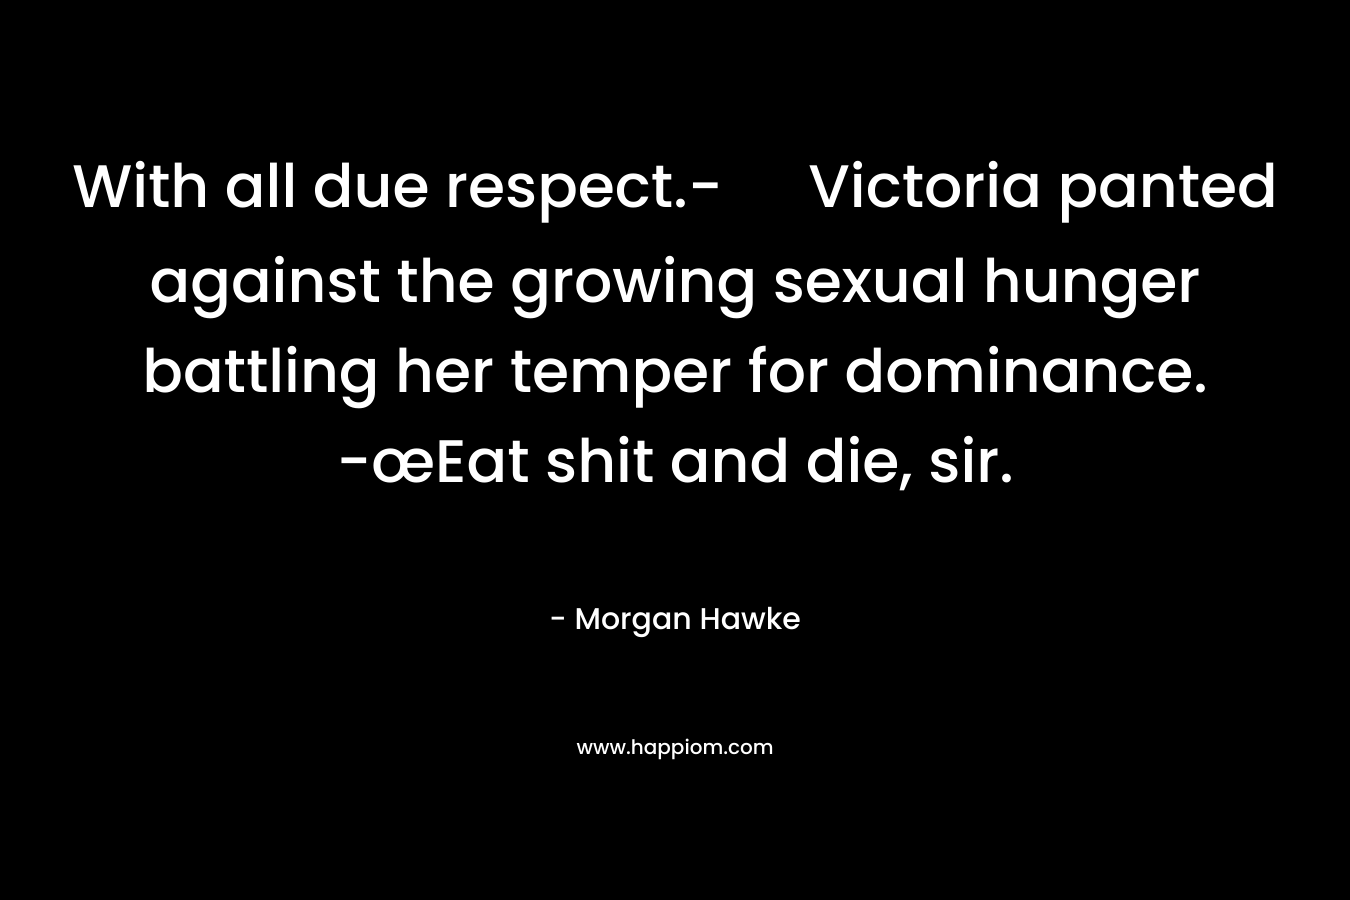 With all due respect.- Victoria panted against the growing sexual hunger battling her temper for dominance. -œEat shit and die, sir. – Morgan Hawke